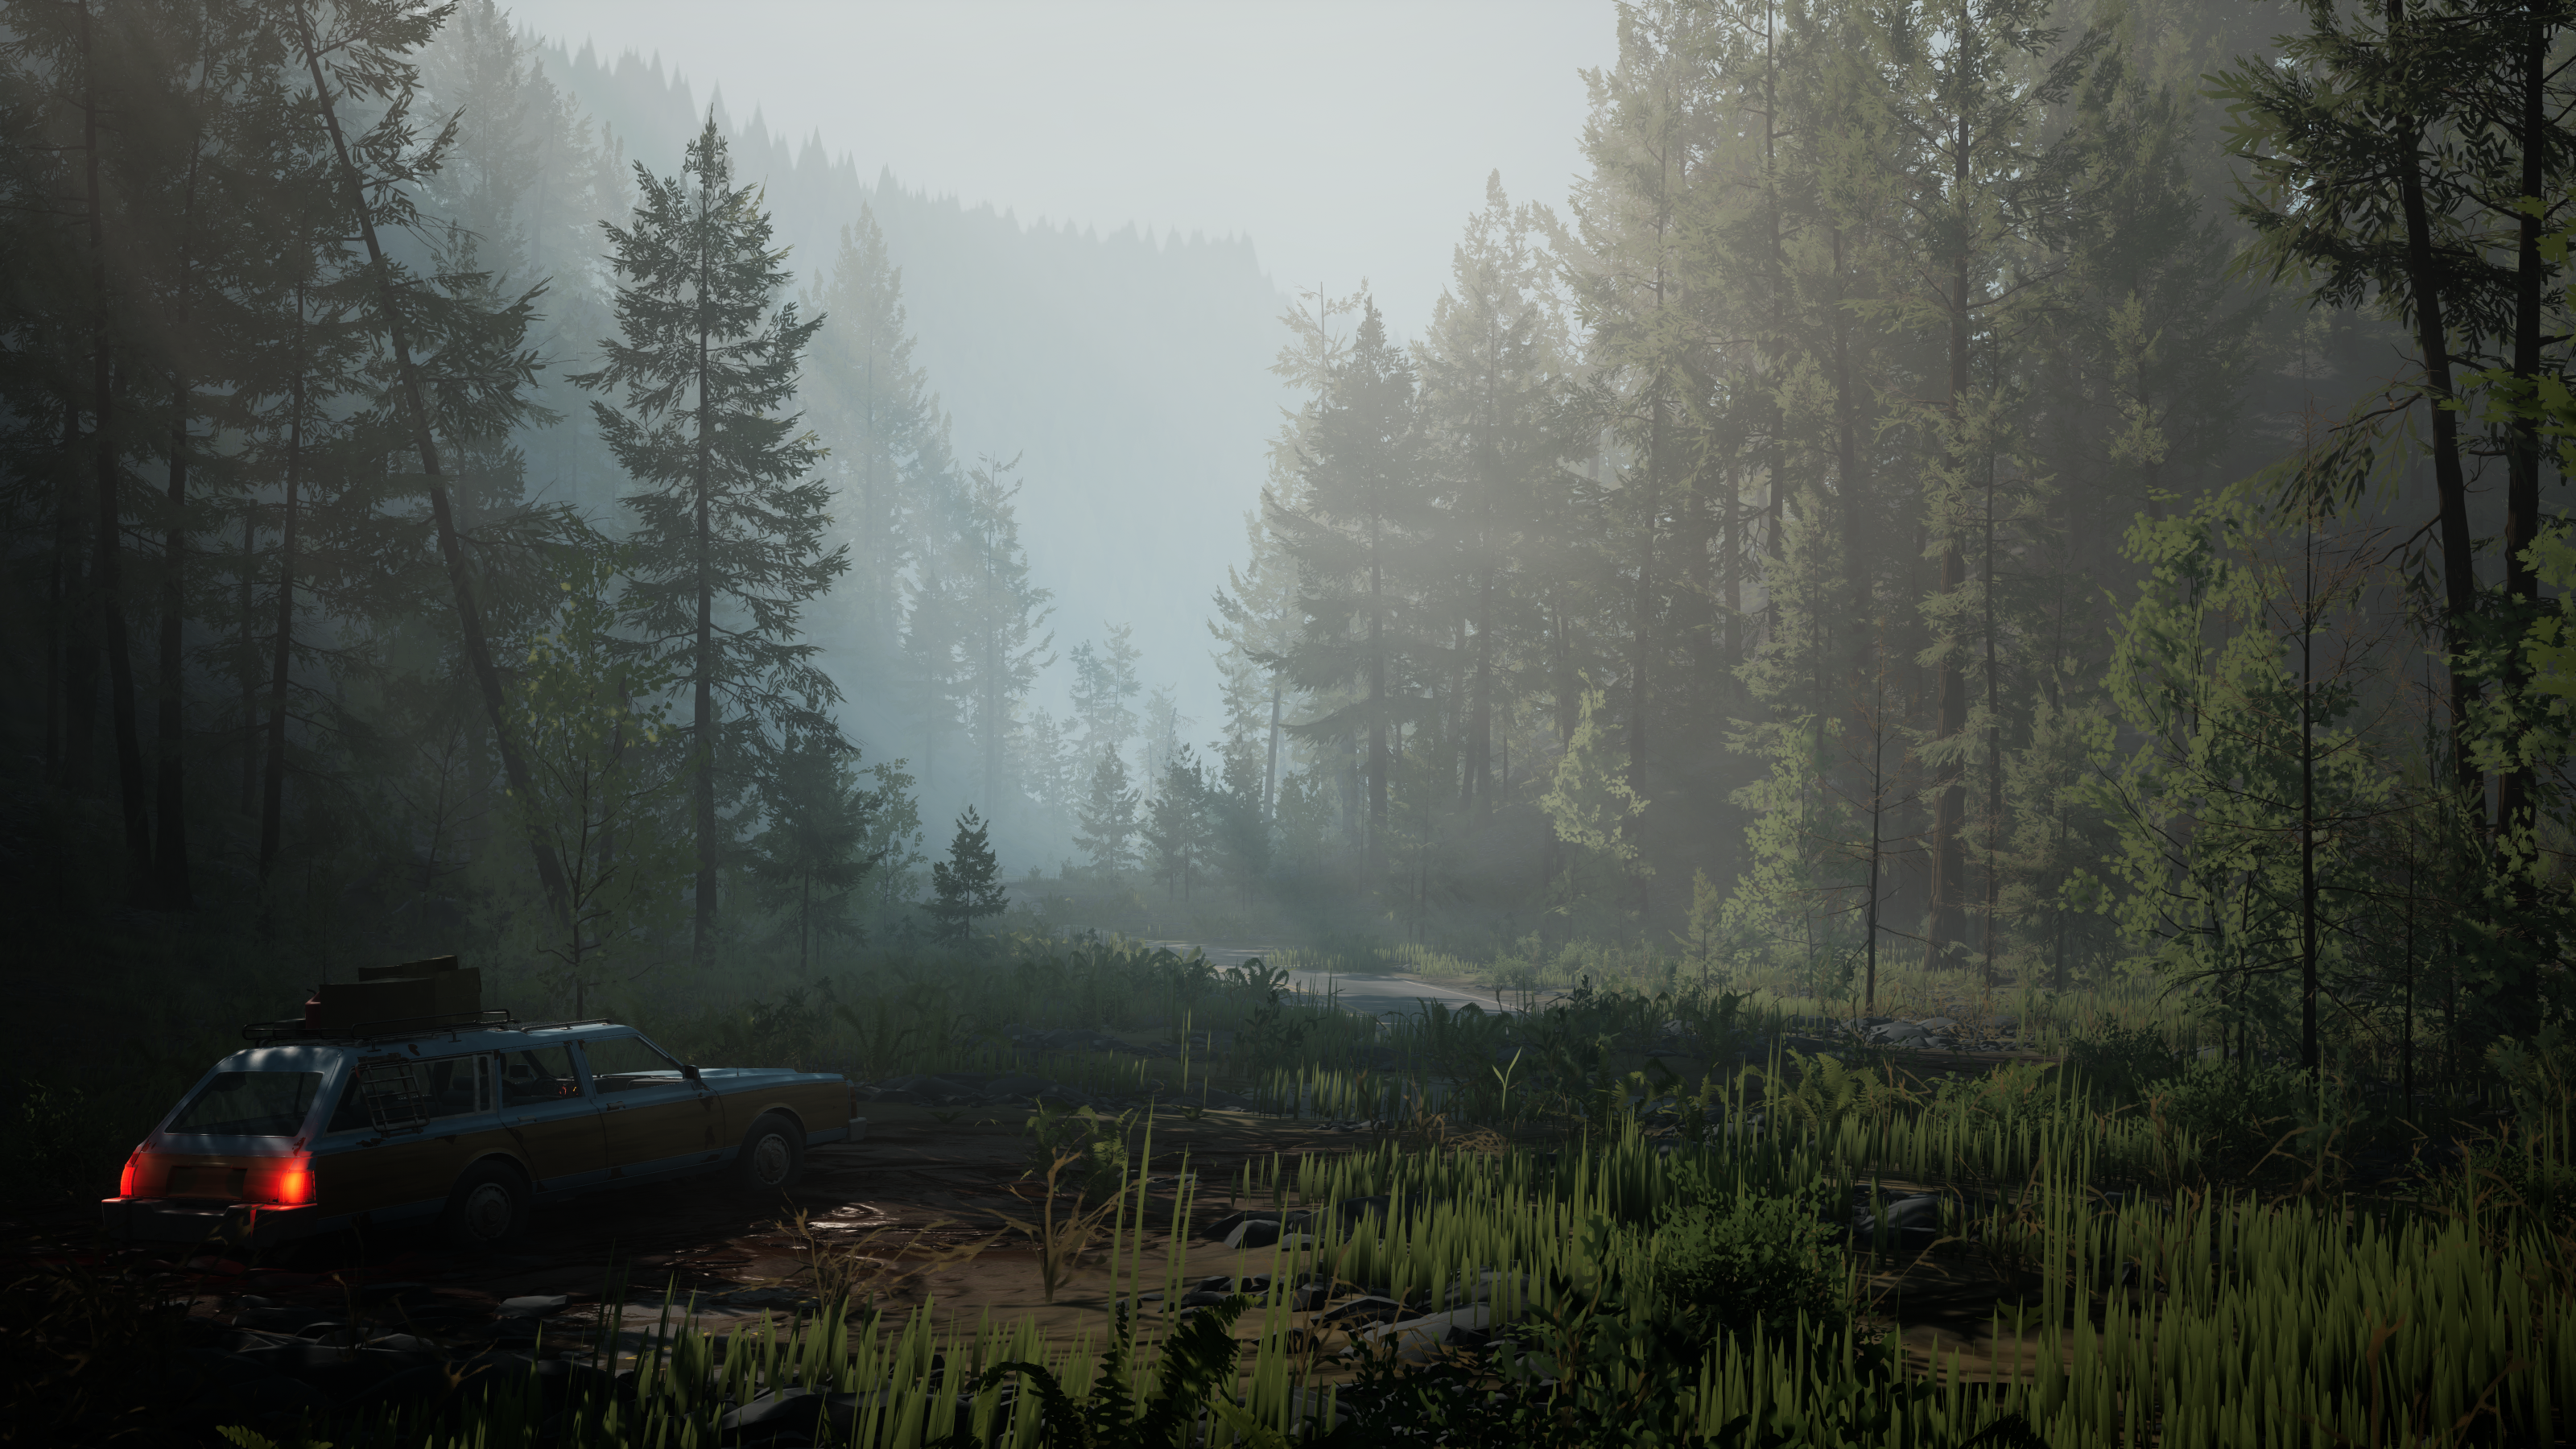 Pacific Drive preview - a view of the forest, with tall pine trees and the station wagon in the foreground